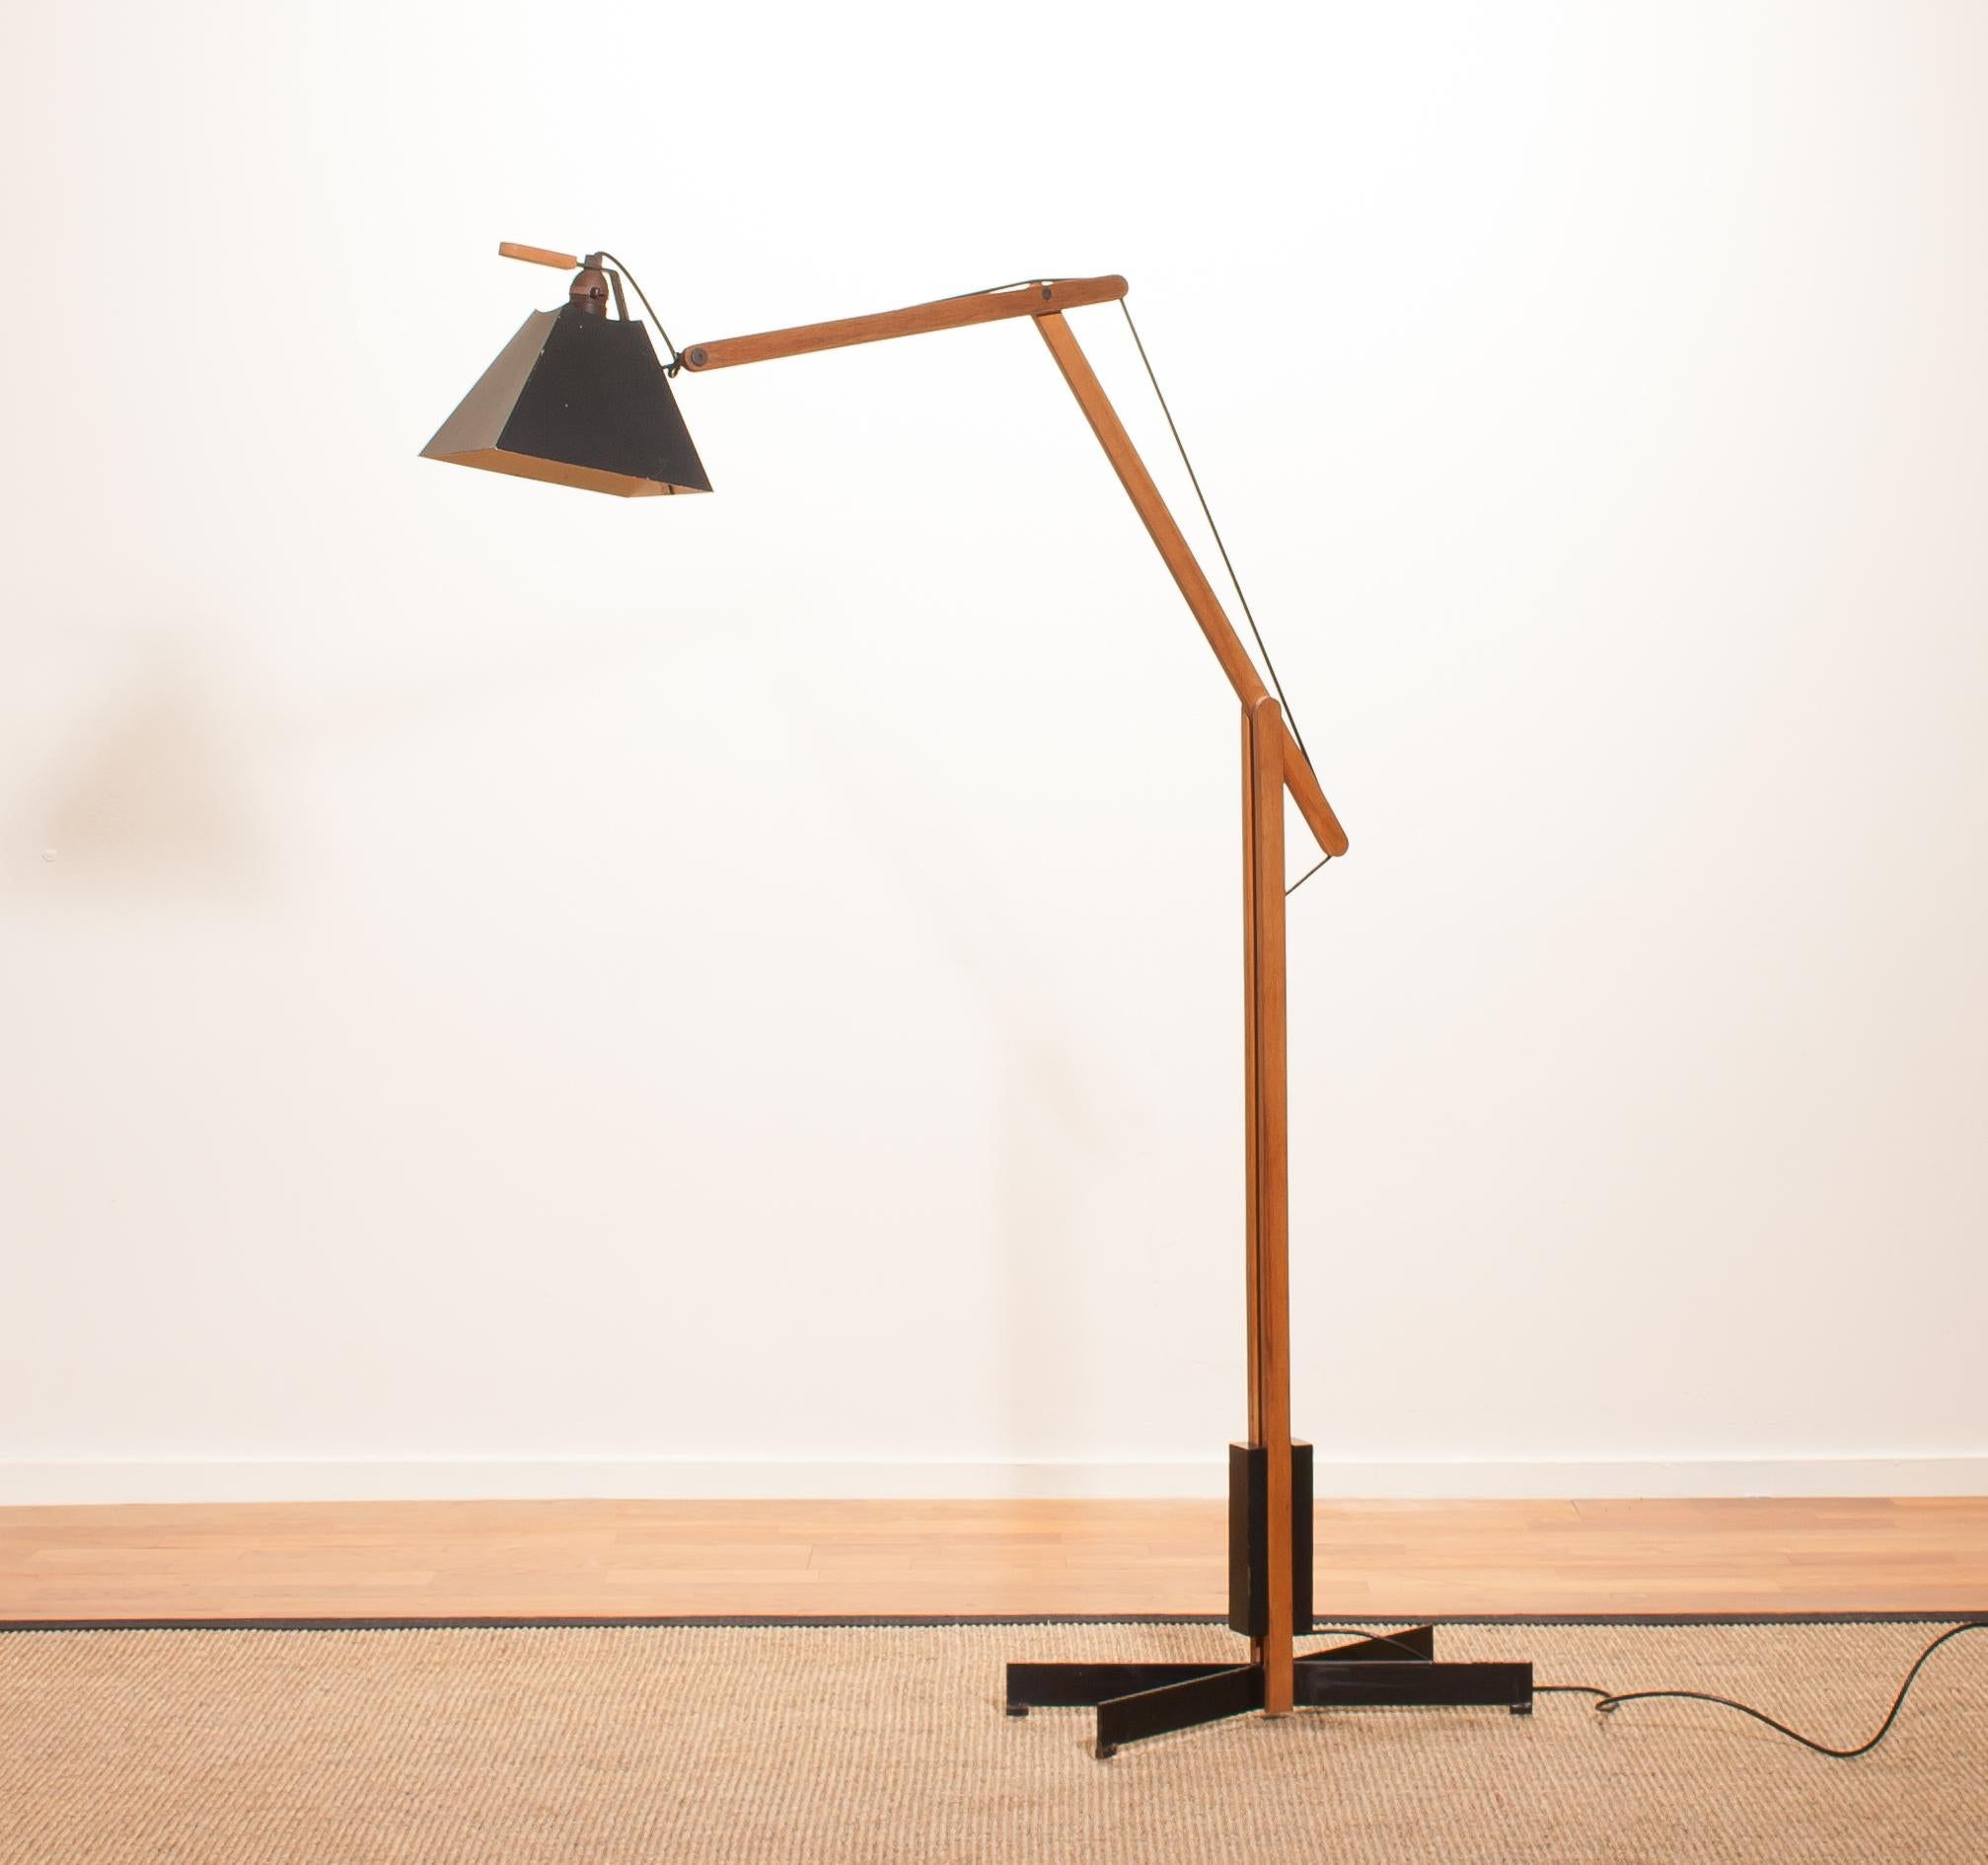 Magnificent rare floor lamp by Luxus, Sweden.
This lamp is adjustable by a counterbalance.
The stand is made of teak with a black lacquered shade.
It is labeled by Luxus and in a beautiful condition.
Period 1950s.
Dimensions: H 125 cm, D 90 cm,